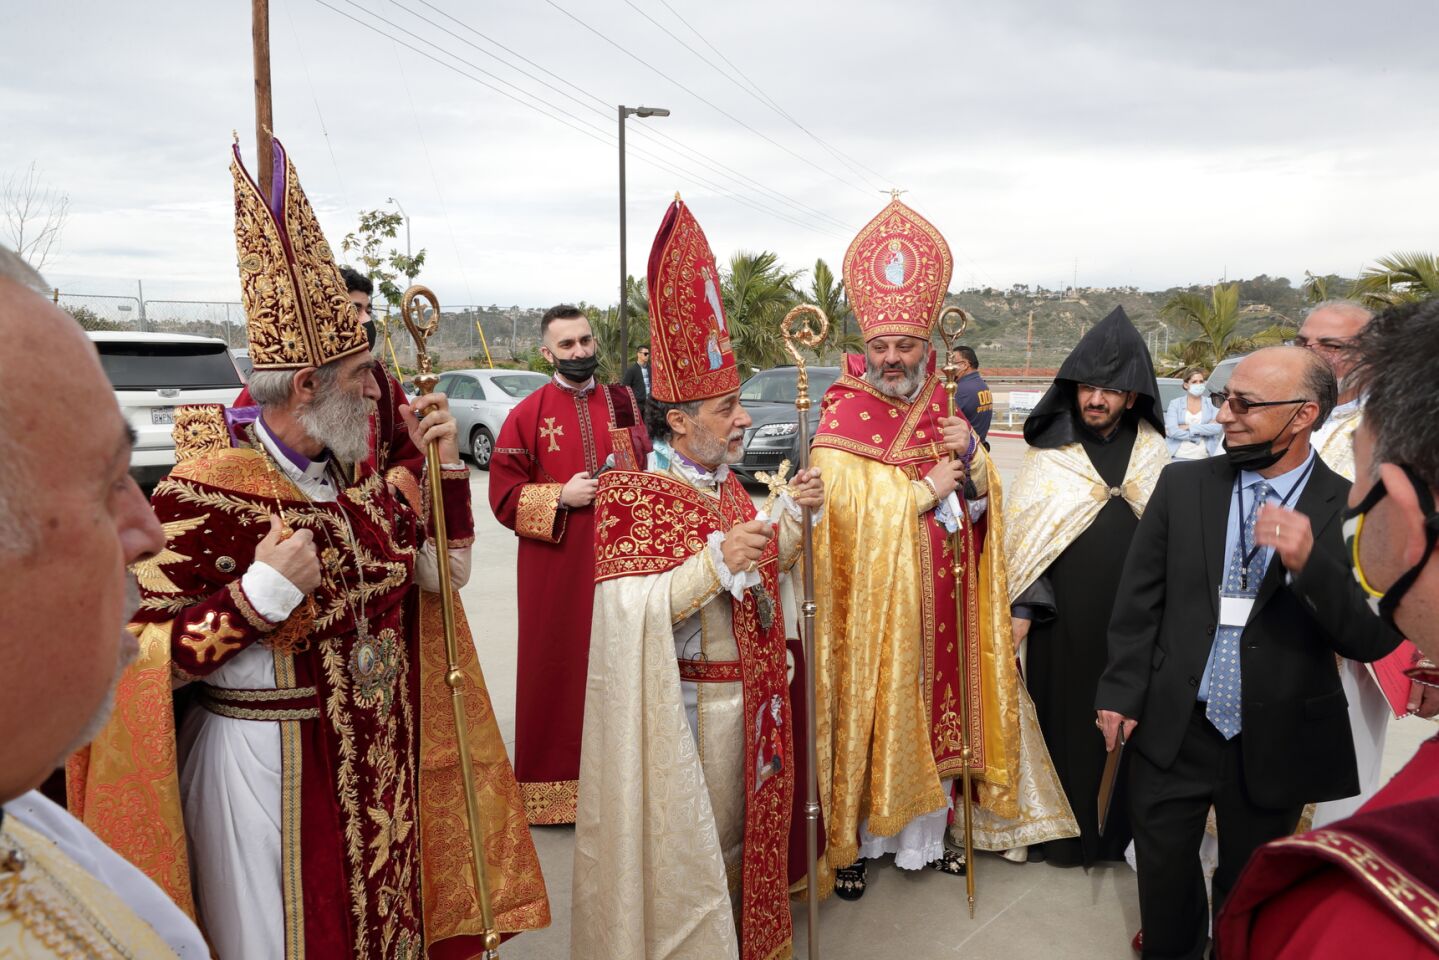 Archbishop Barkev Martirosyan (Former Primate of Artsakh, Armenia), Archbishop Hovnan Derderian (Primate, Western Diocese of Armenian Church), and Bishop Bagrat Galastanyan (Primate of the Diocese of Tavush, Armenia) prepare to preside over the consecration and church naming ceremony at the new Armenian Church in San Diego